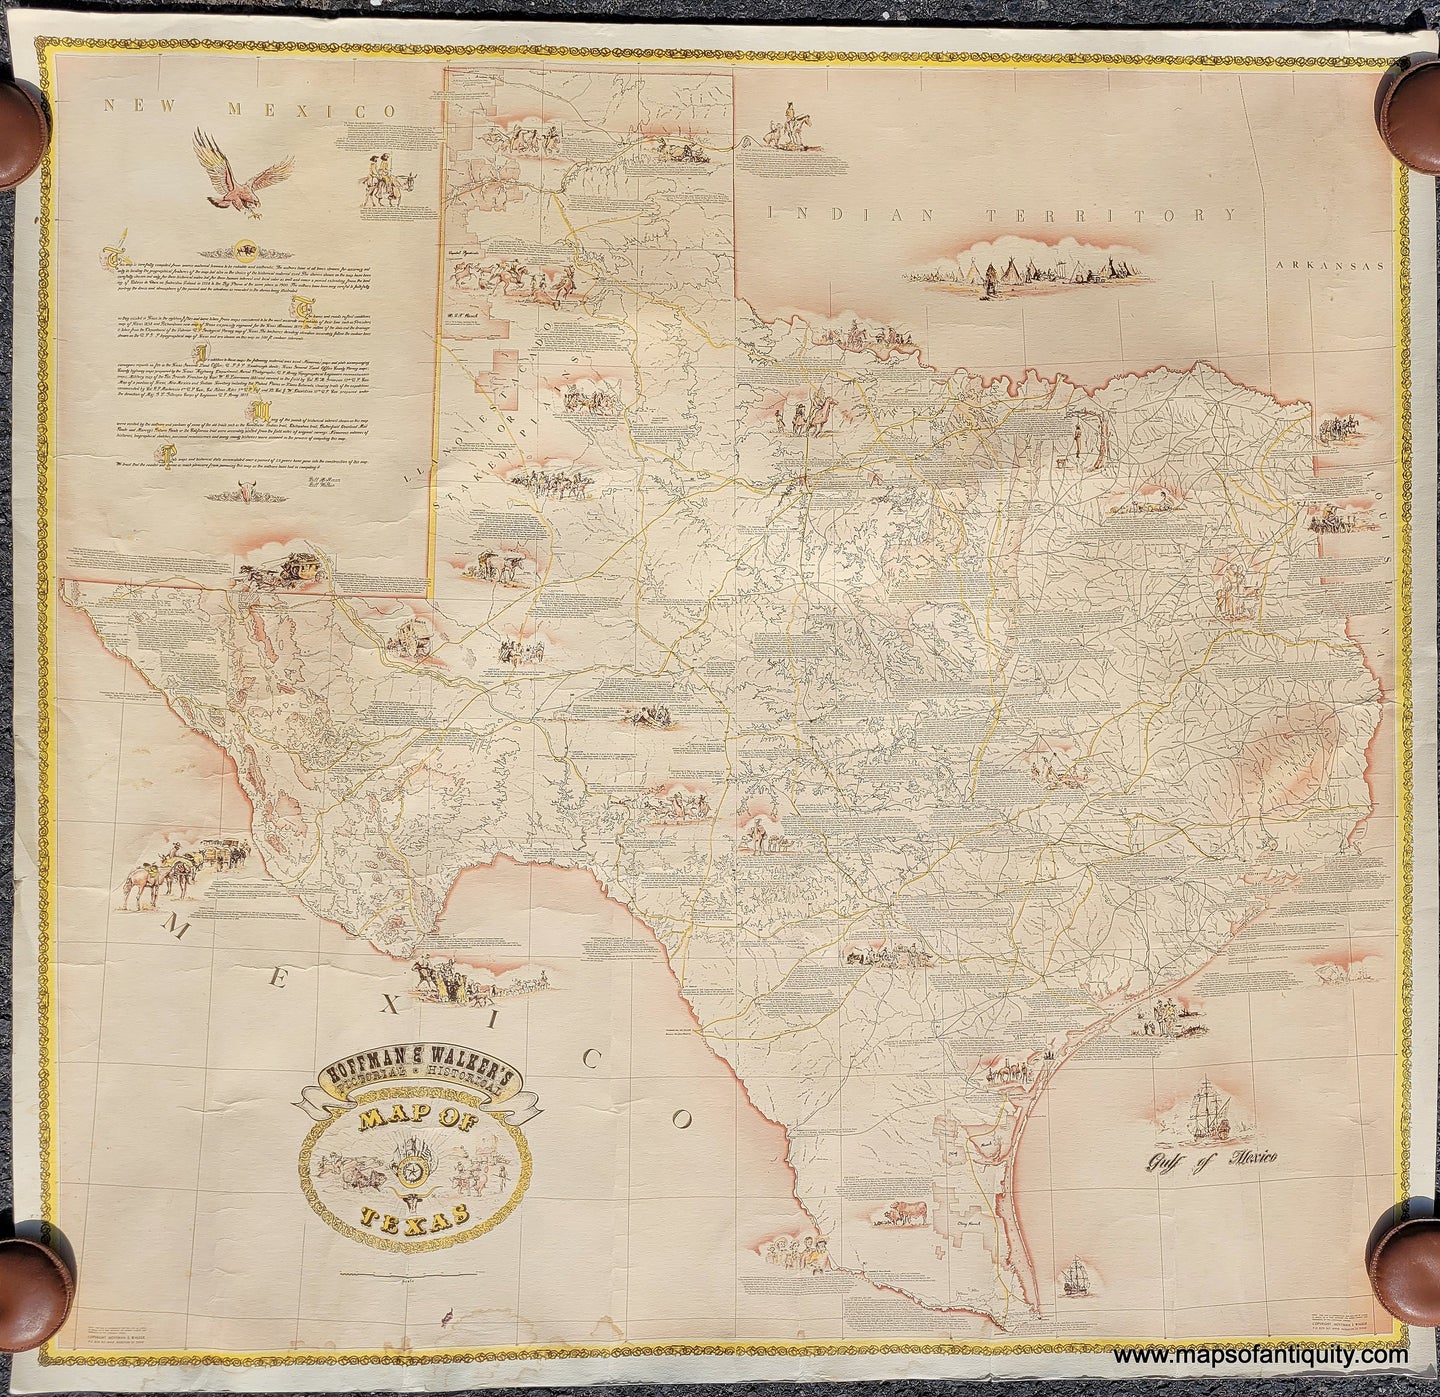 1960 - Hoffman & Walker's Pictorial, Historical Map of Texas - Antique Pictorial Map.